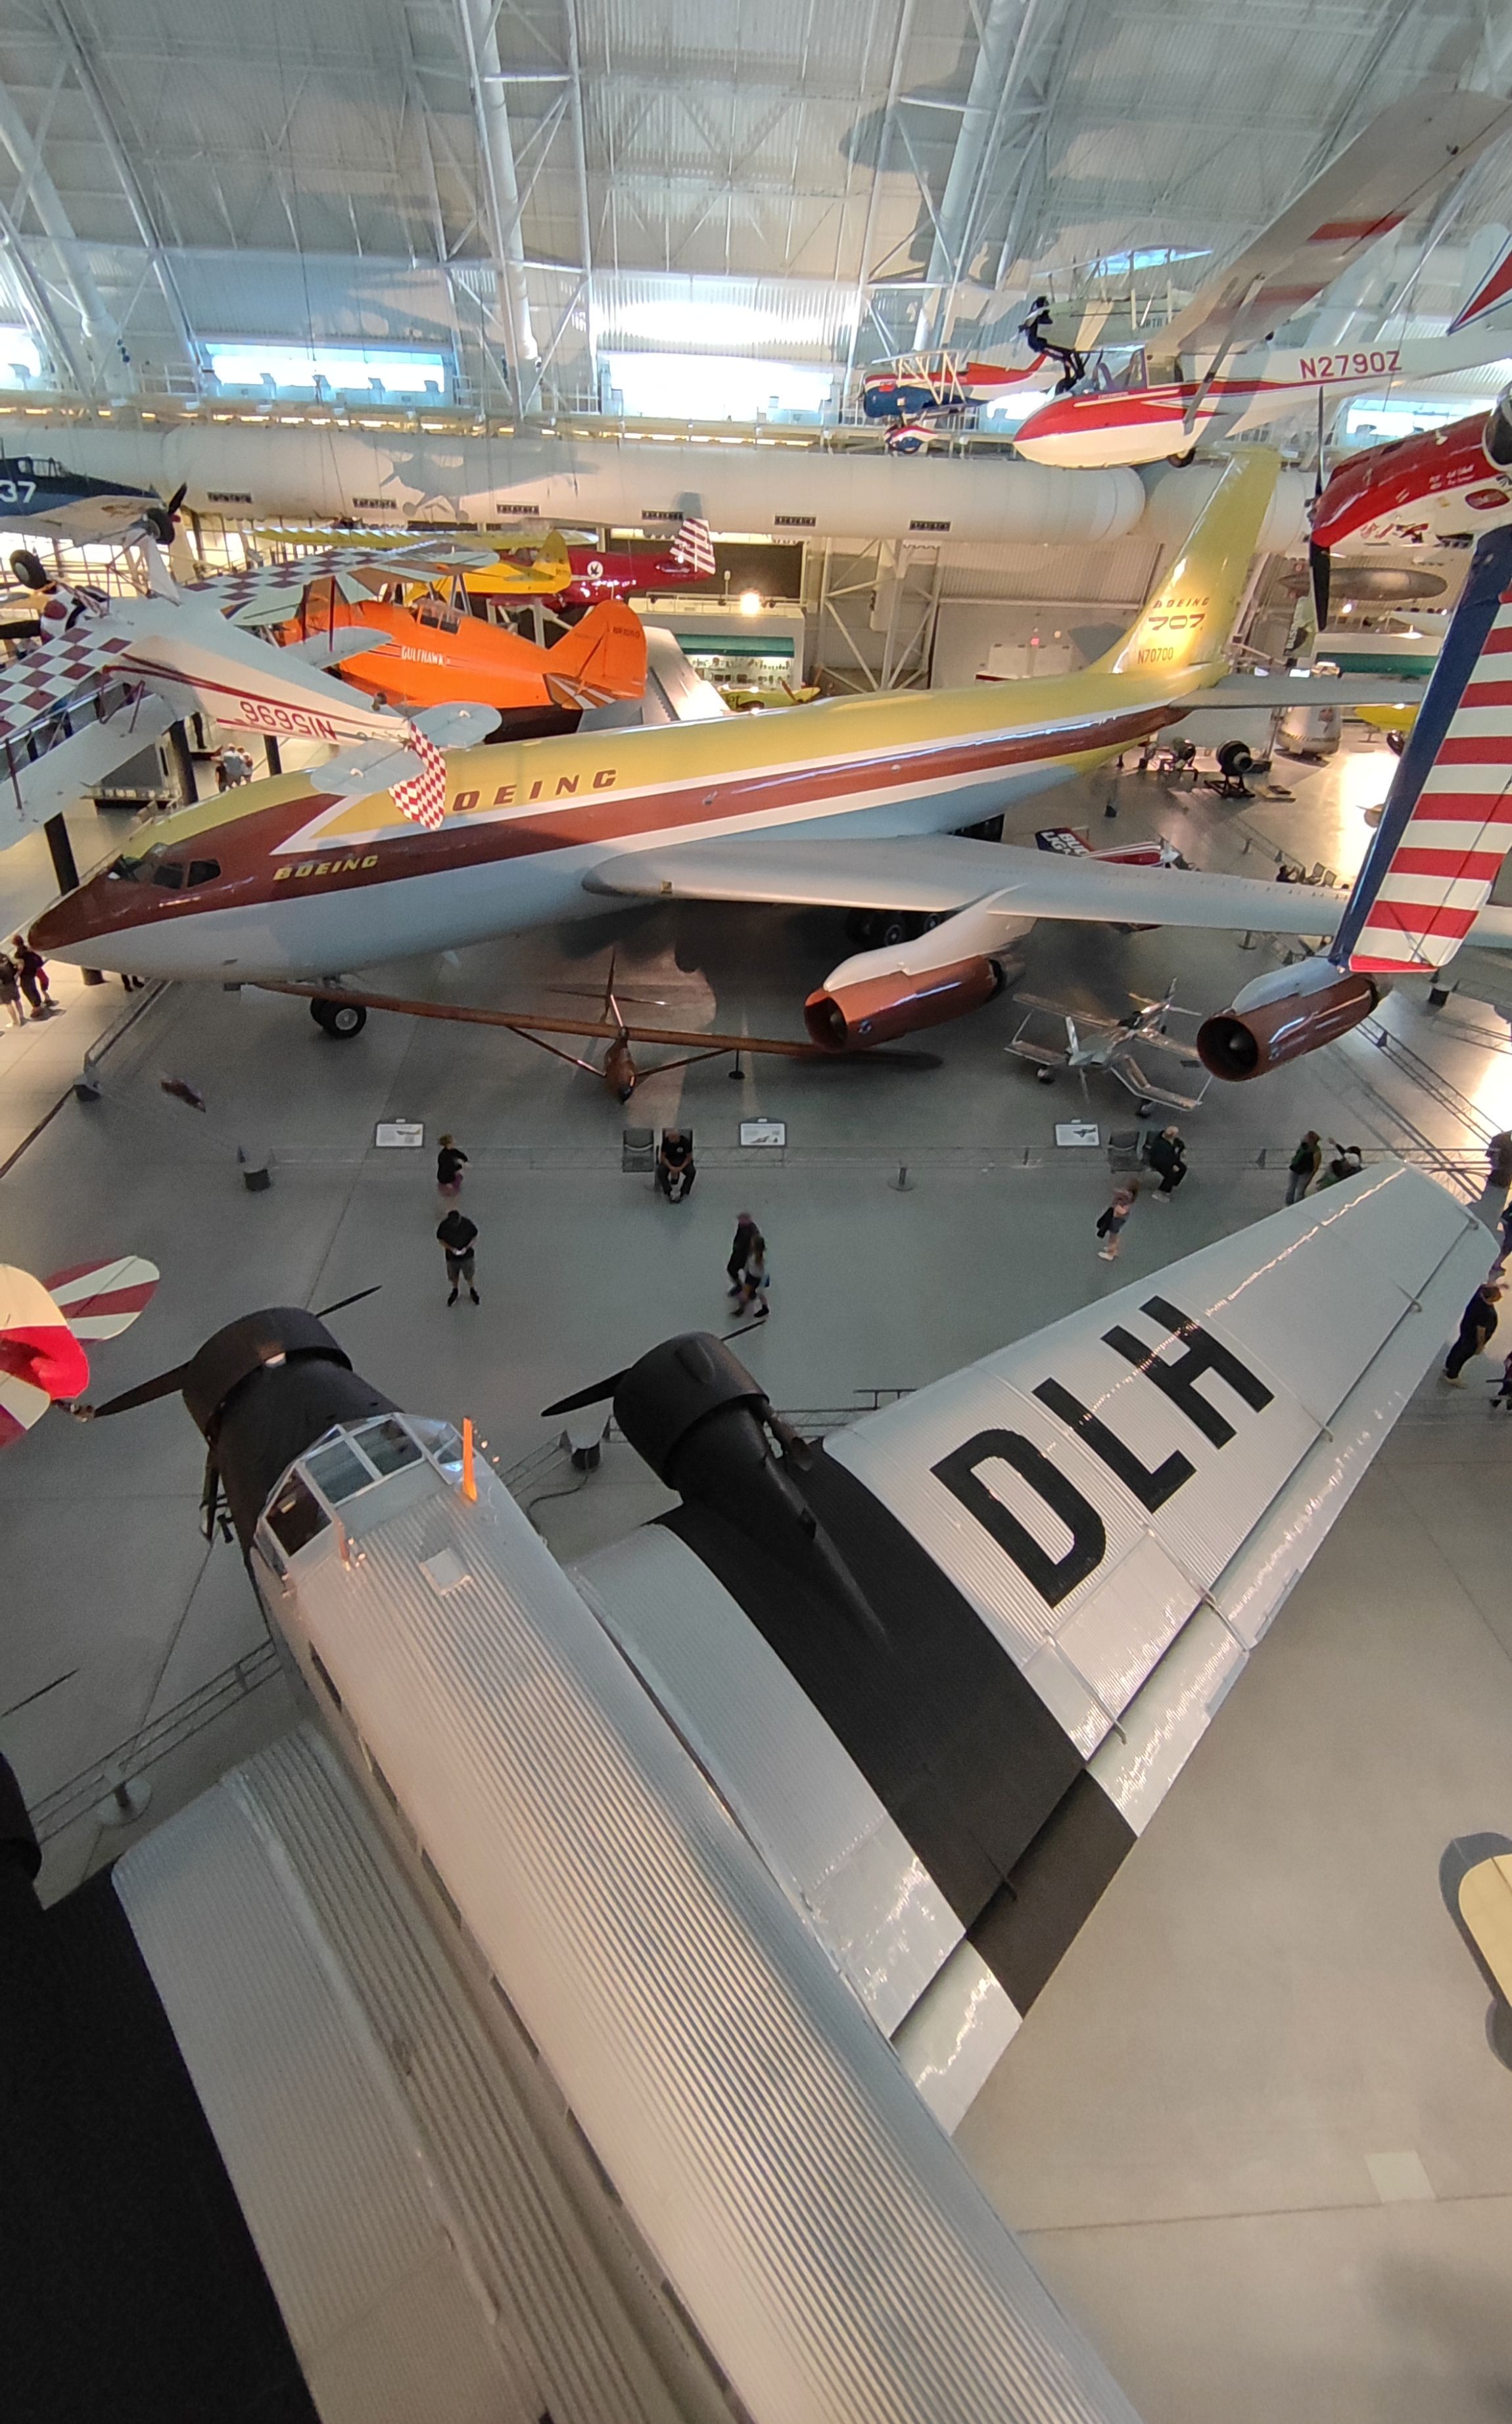 The Boeing 707 and other planes at Washington's Air and Space Museum.